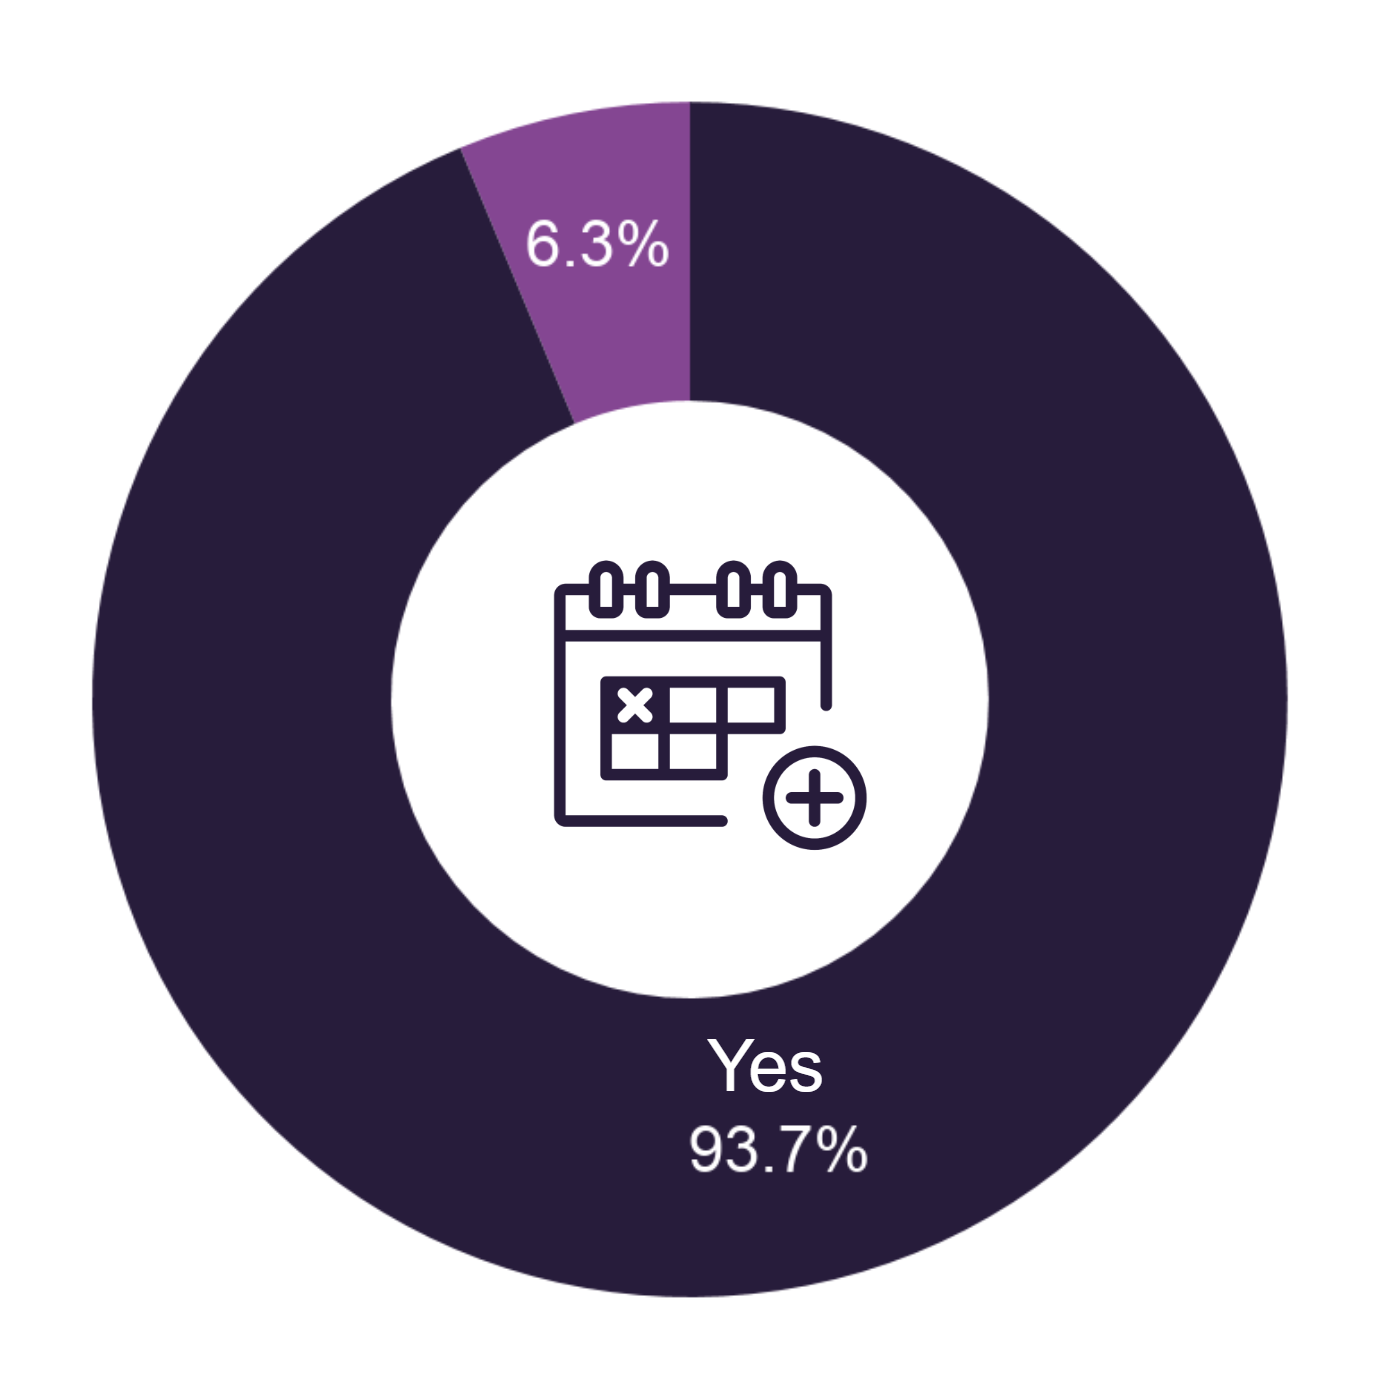 survey results for covid-19 on whether consumers were willing to give retailers more time to deliver items.